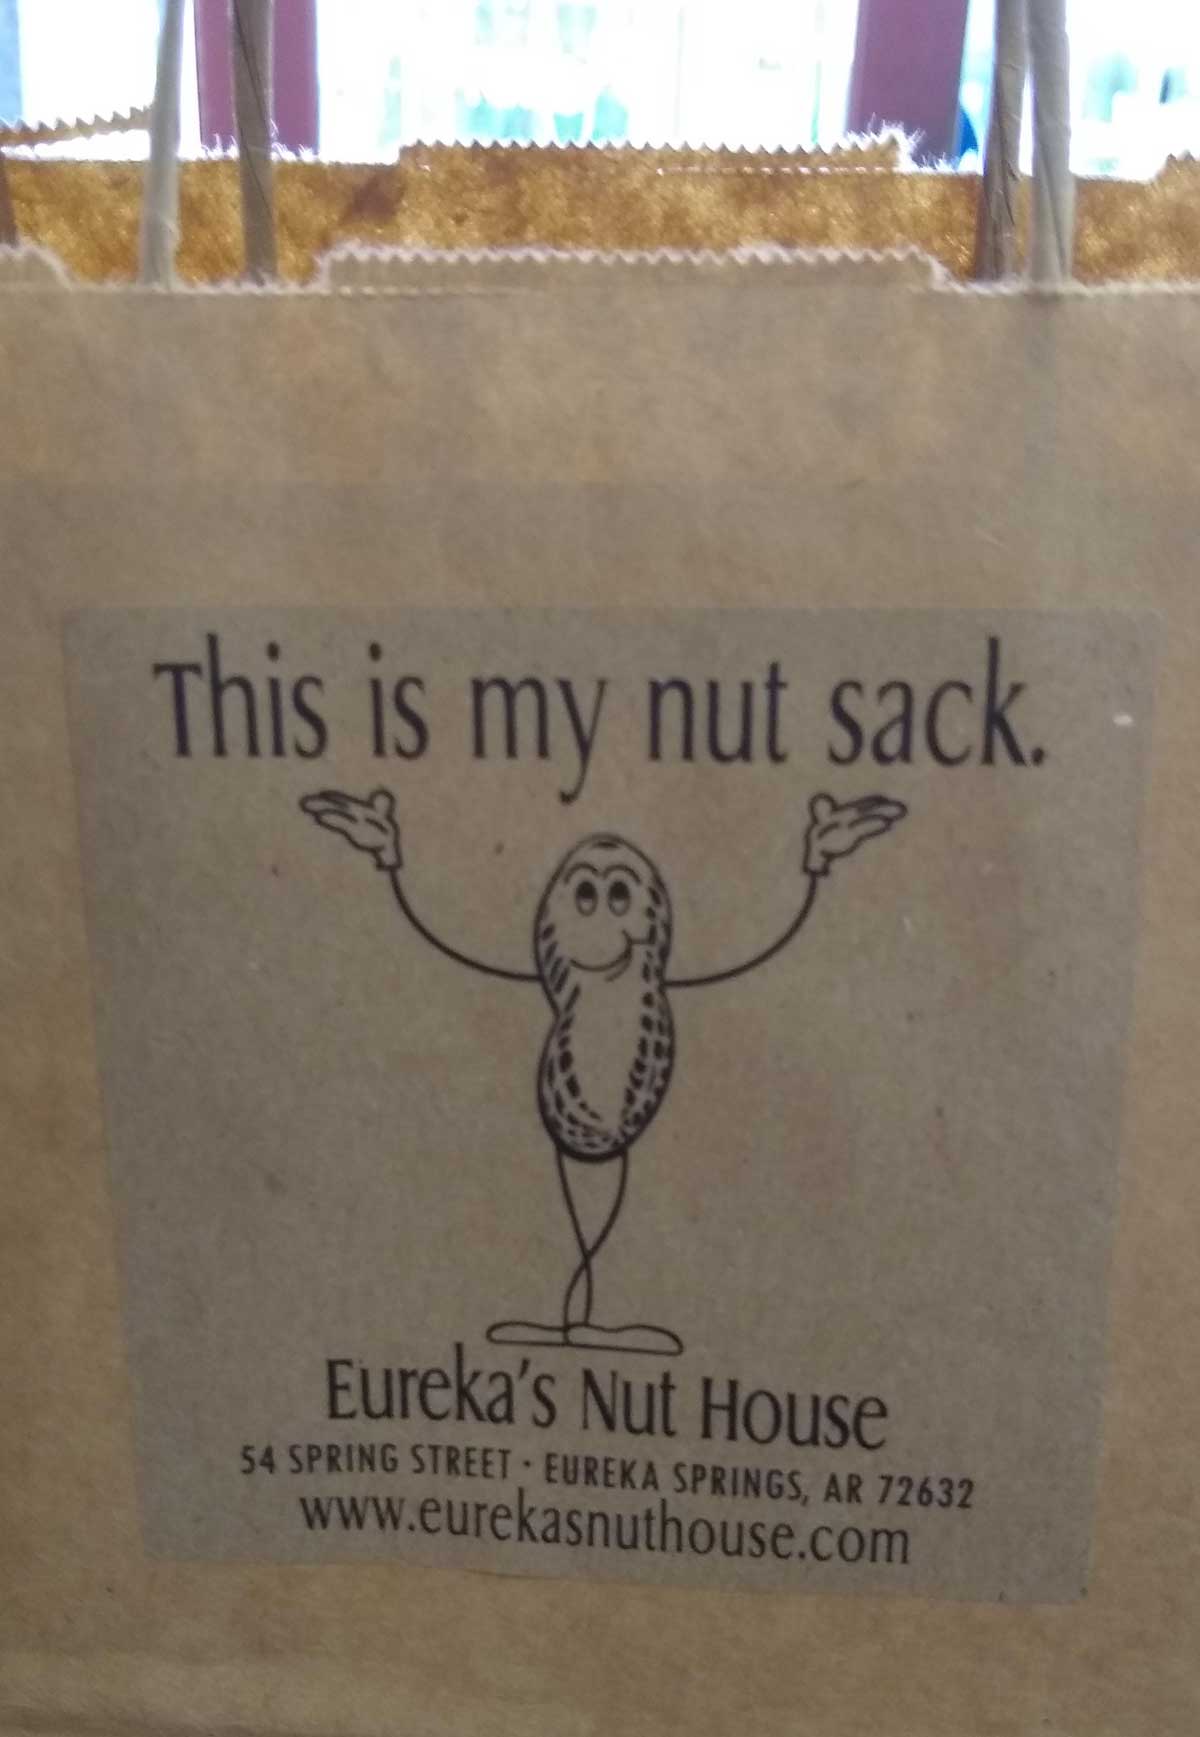 The bags for this snack shop in Arkansas